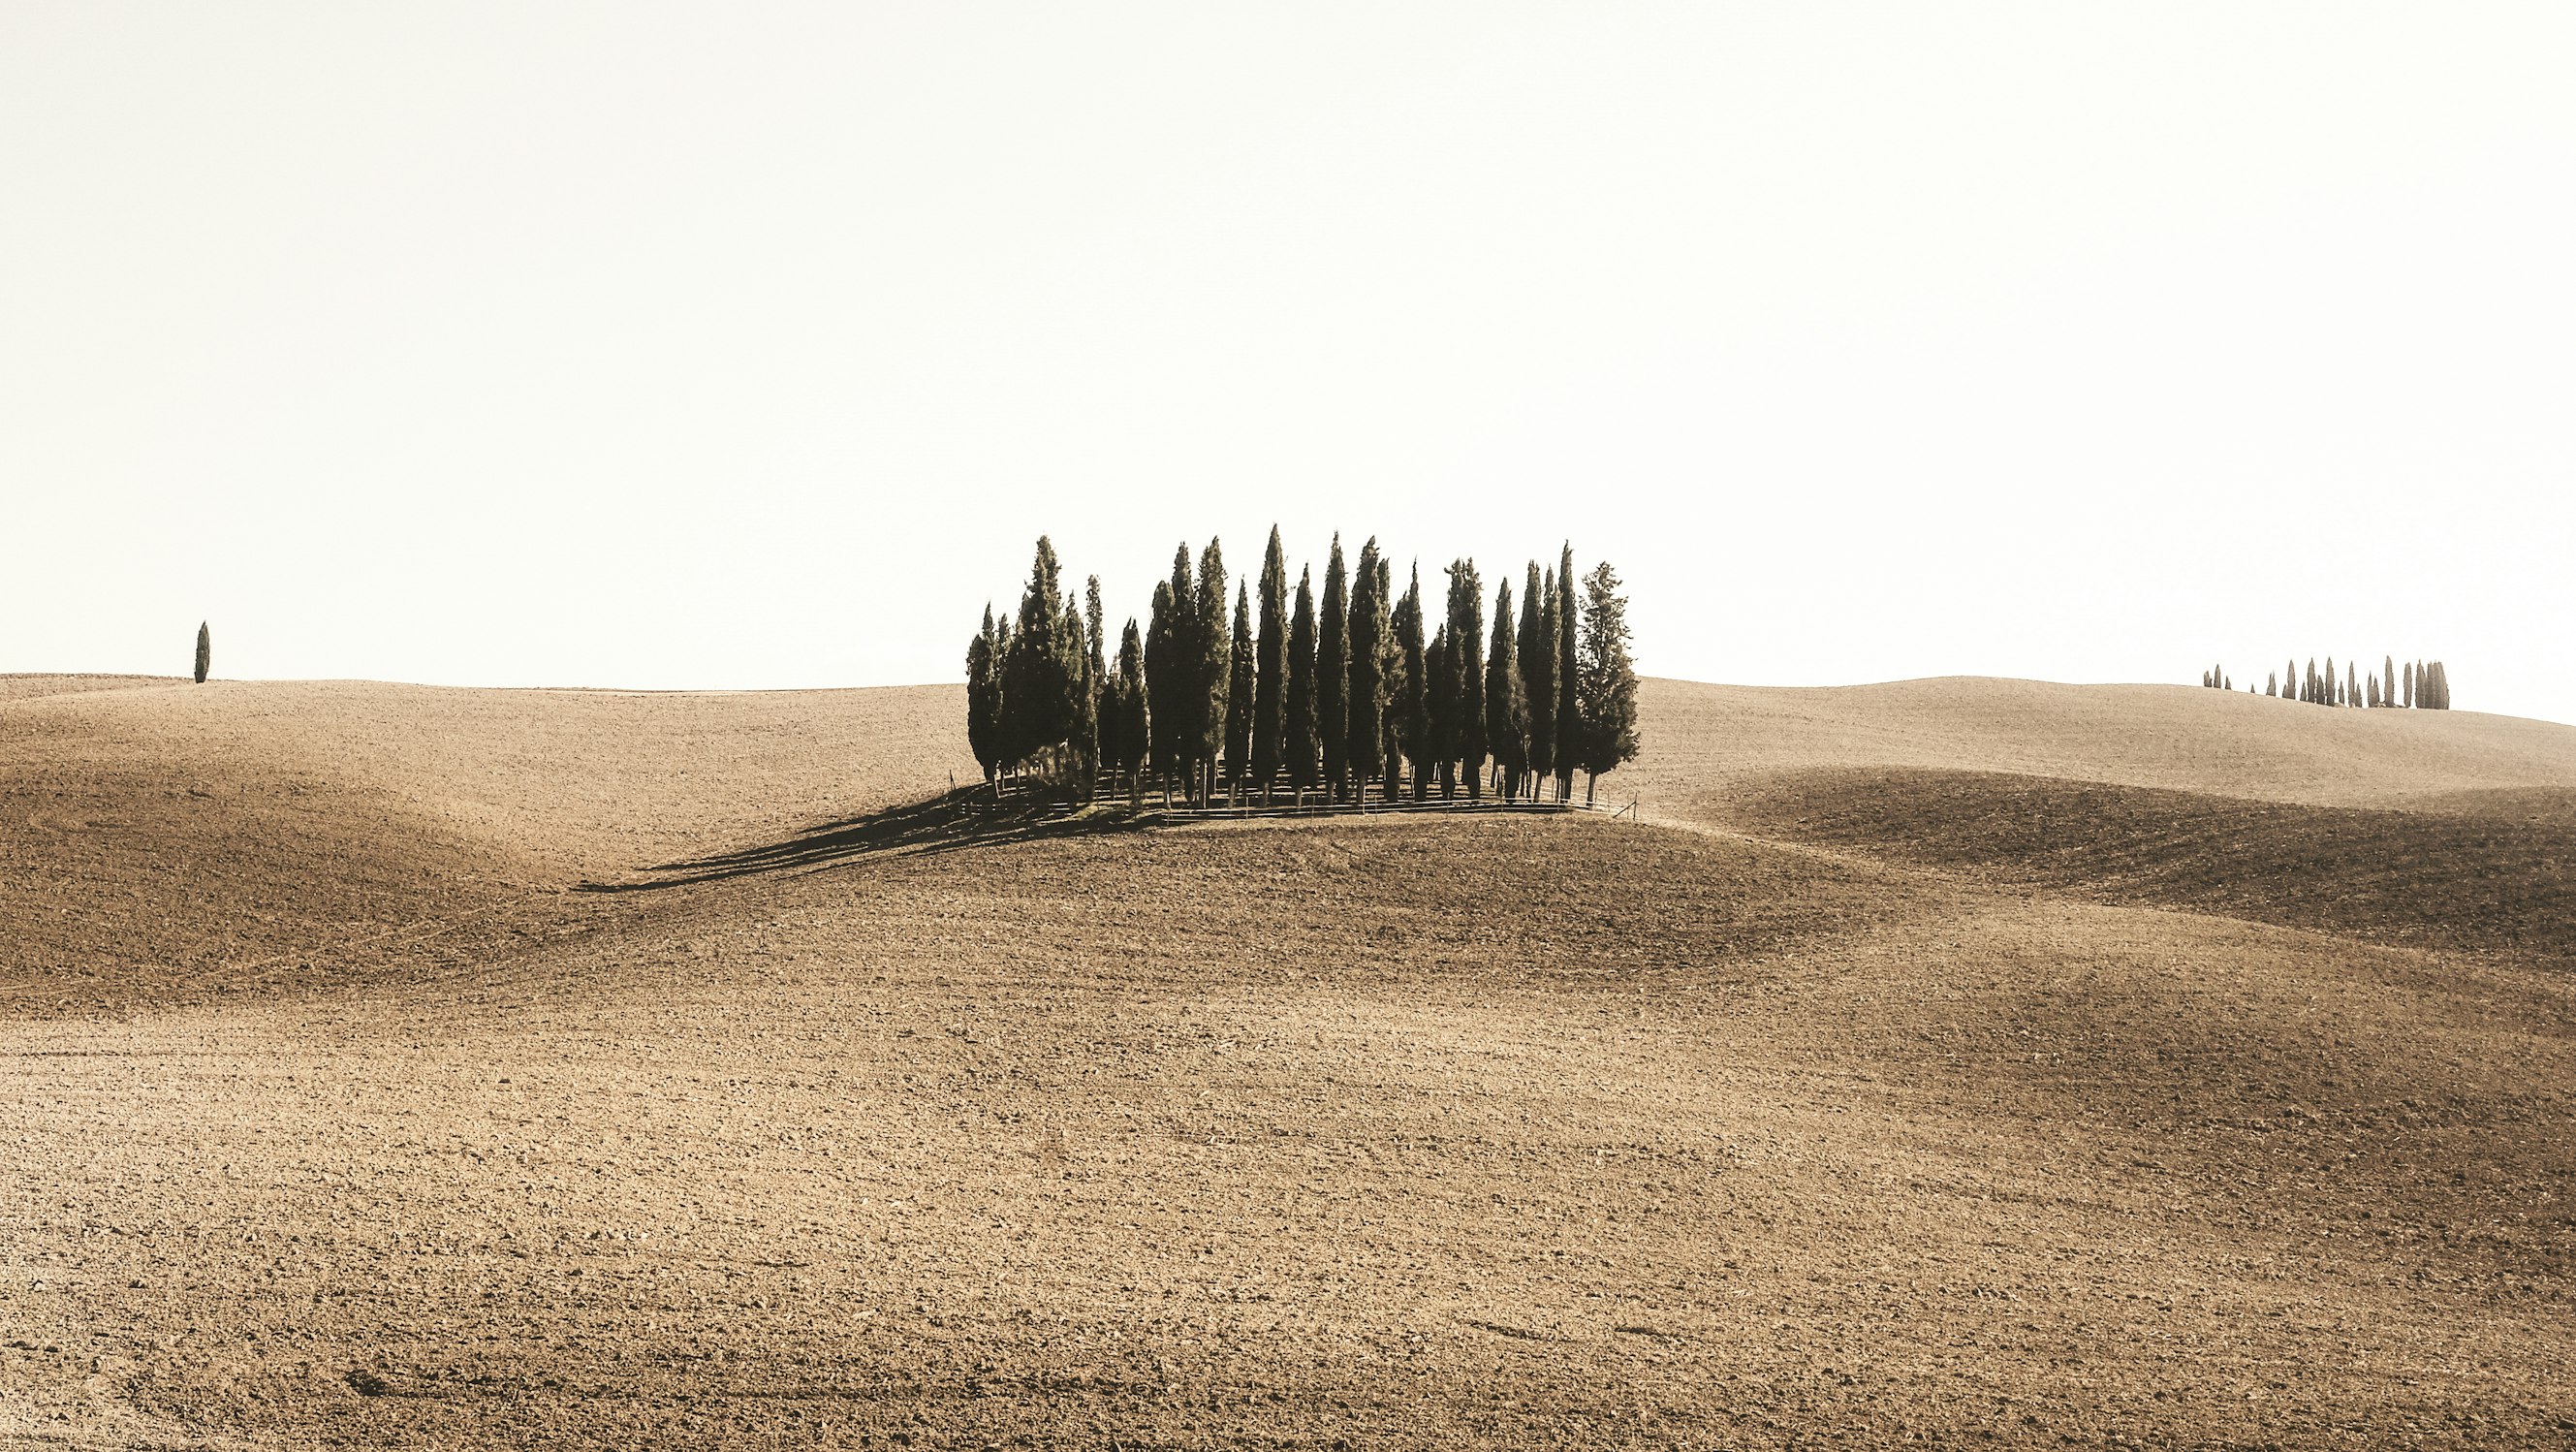 An image of trees in a field used to illustrate calm